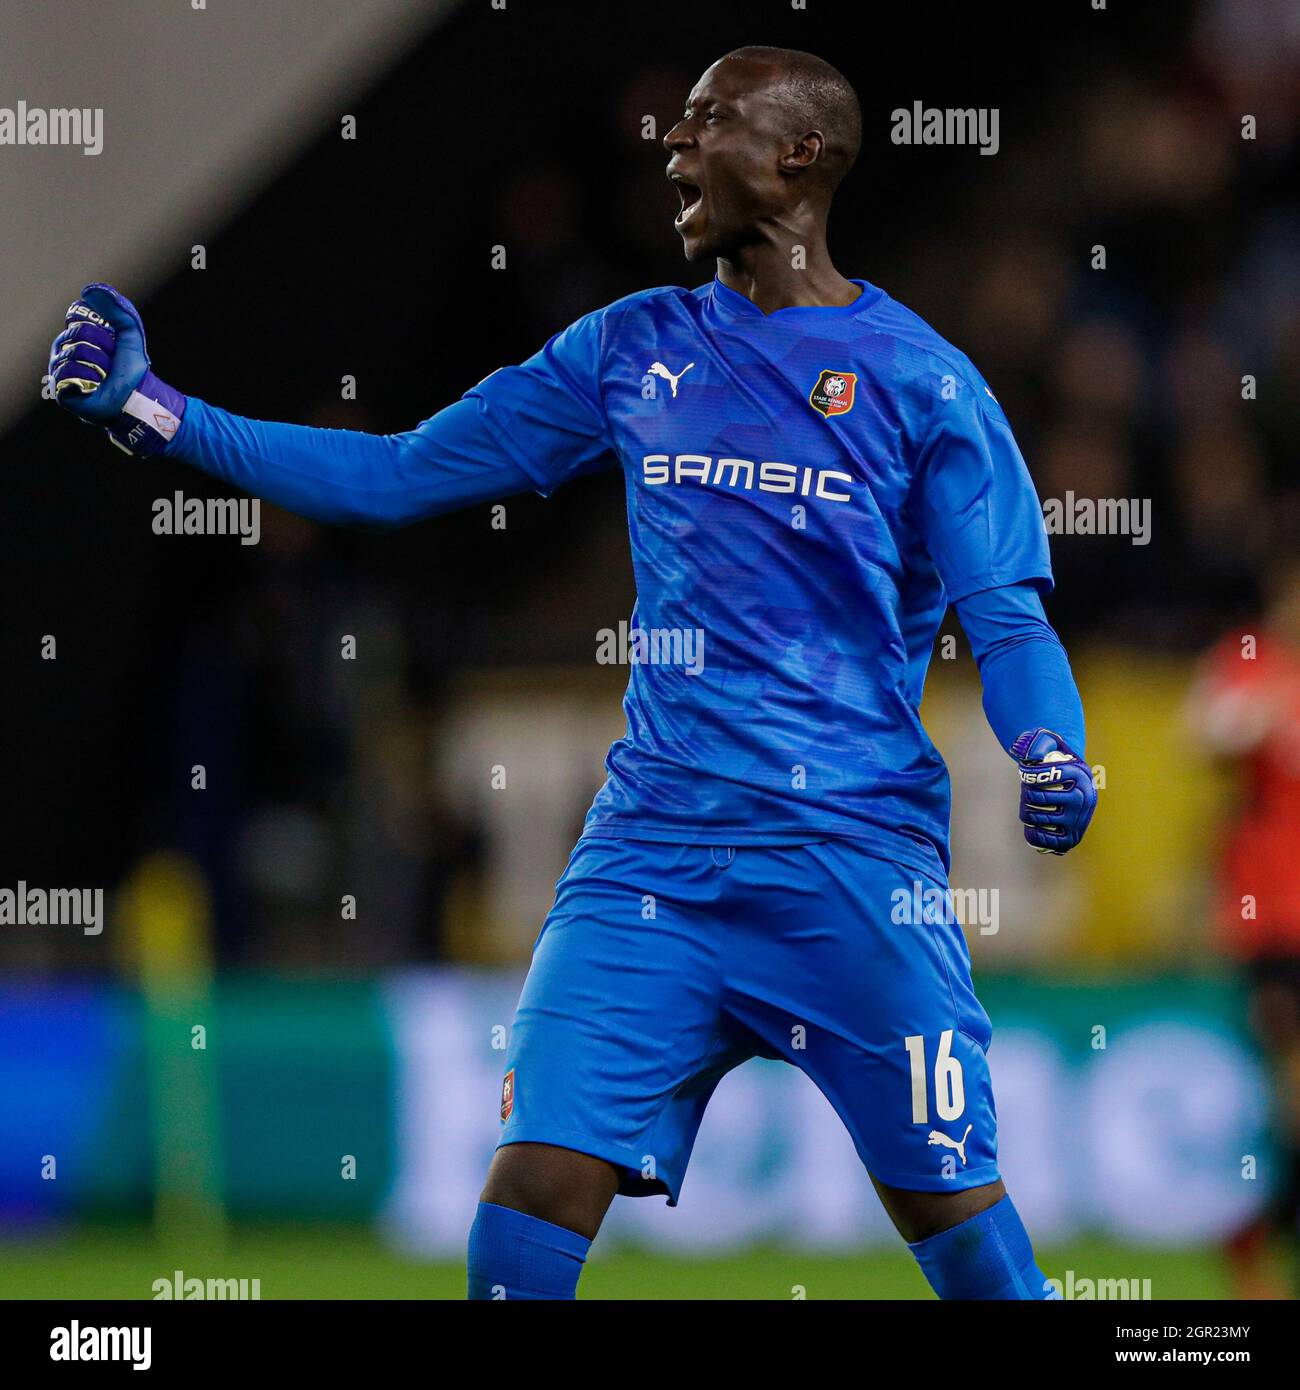 ARNHEM, NETHERLANDS - SEPTEMBER 30: goalkeeper Alfred Gomis of Stade Rennais celebrates after scoring his teams second goal during the UEFA Conference League match between Vitesse and Stade Rennais at Gelredome on September 30, 2021 in Arnhem, Netherlands (Photo by Peter Lous/Orange Pictures) Stock Photo